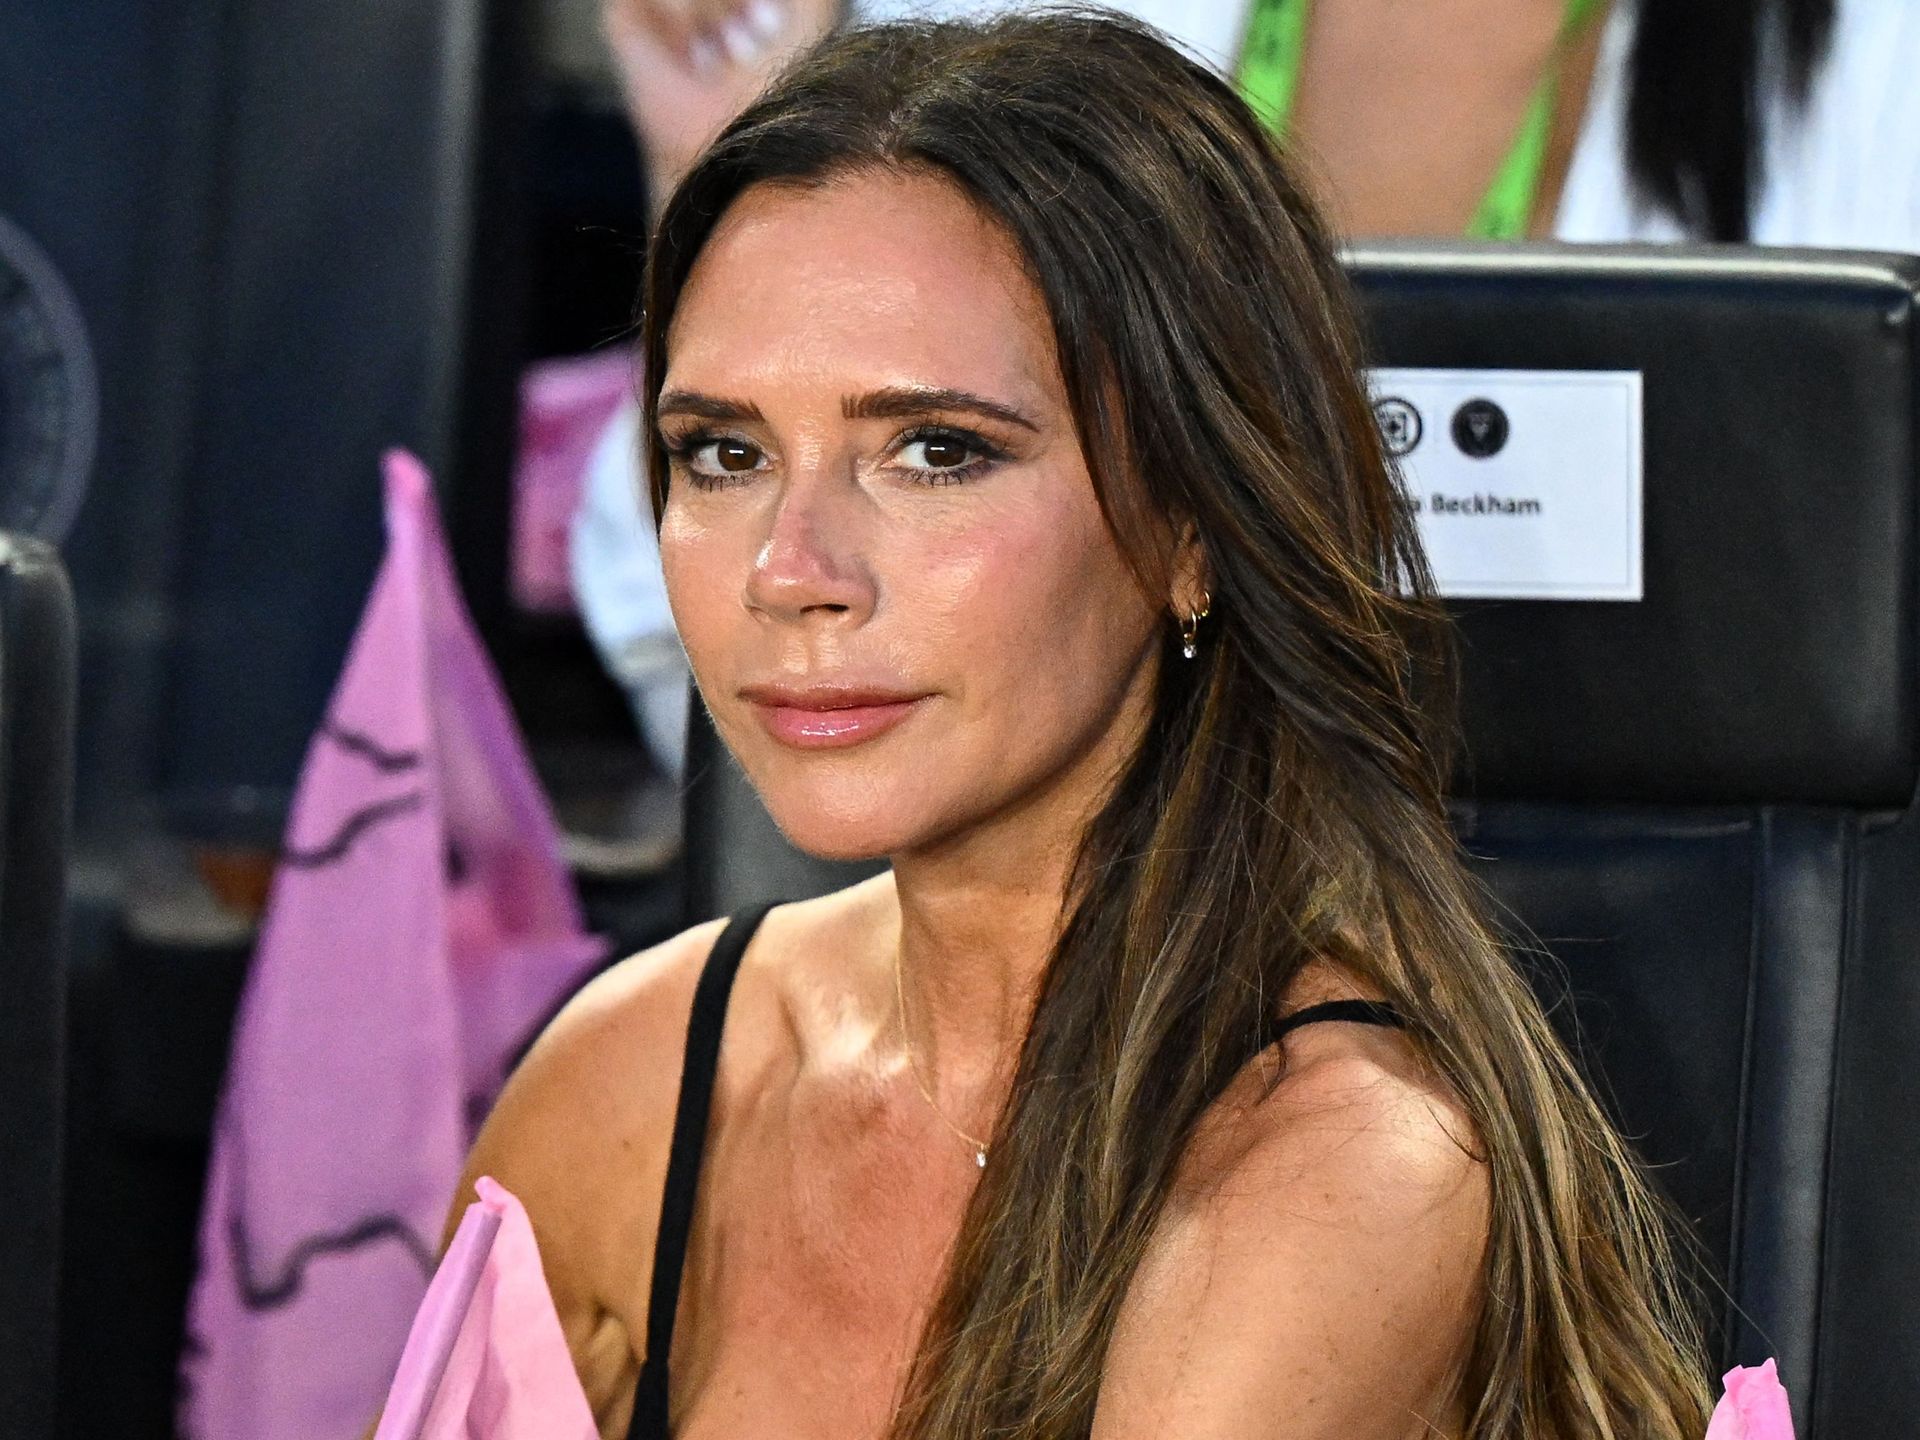 Victoria Beckham reveals her beauty and fitness routine she follows to look  that good at 49